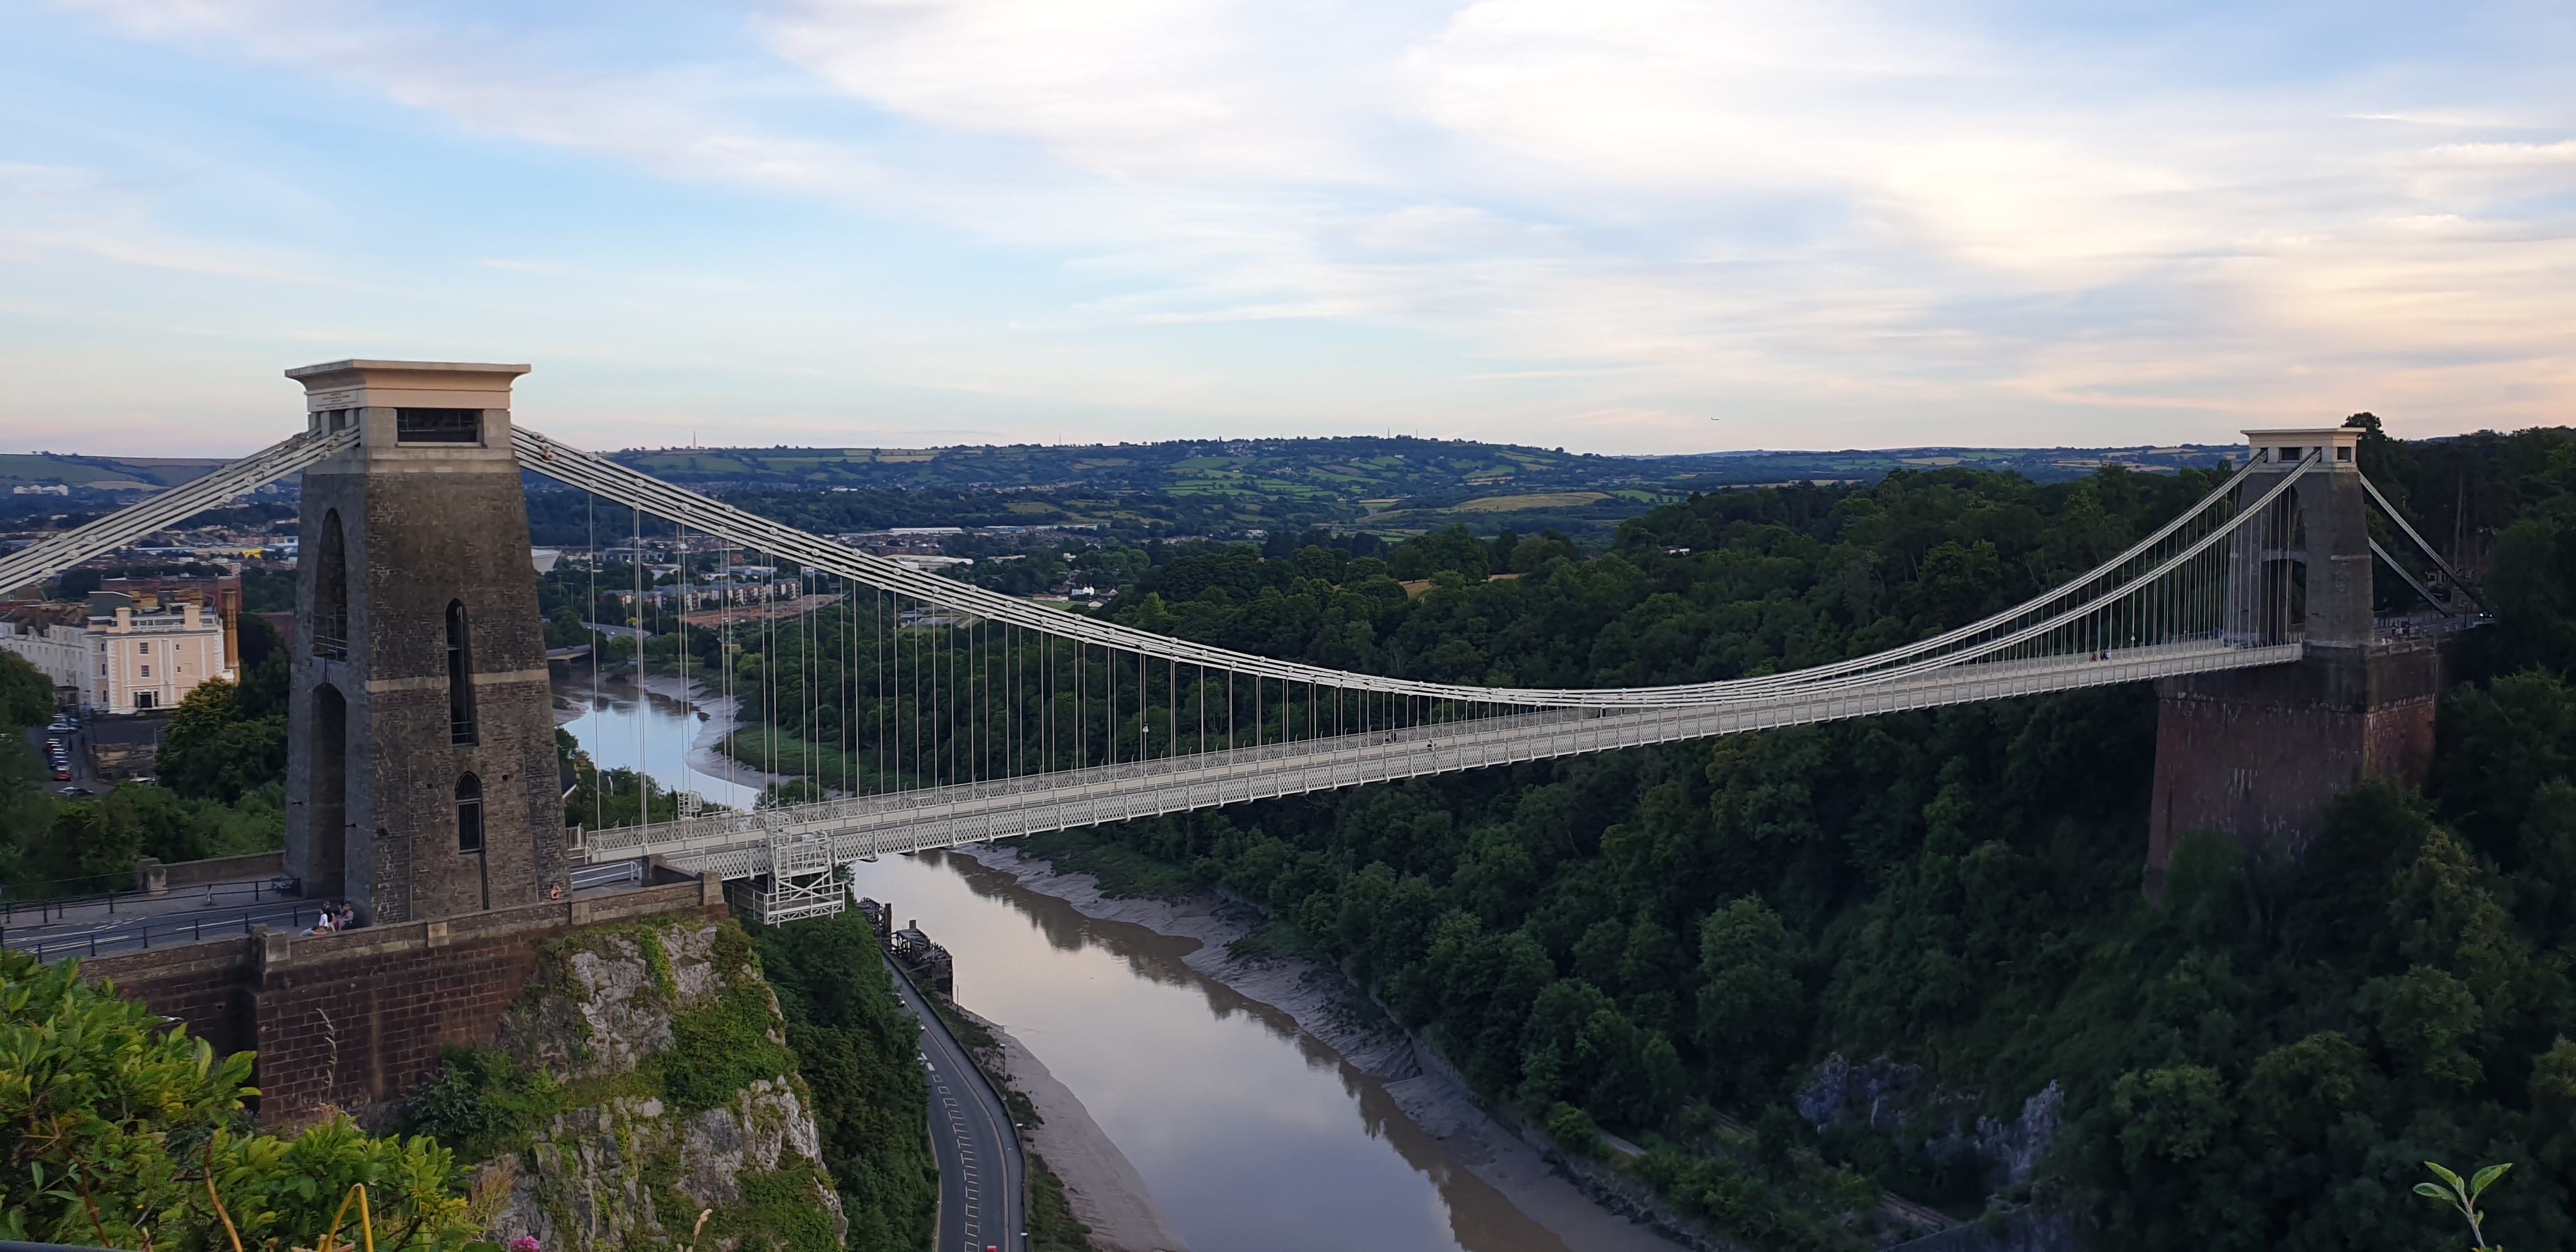 a photo of Clifton suspension bridge, taken from a nearbyhillside, with the river avon below it and a blue dusky skyin the background